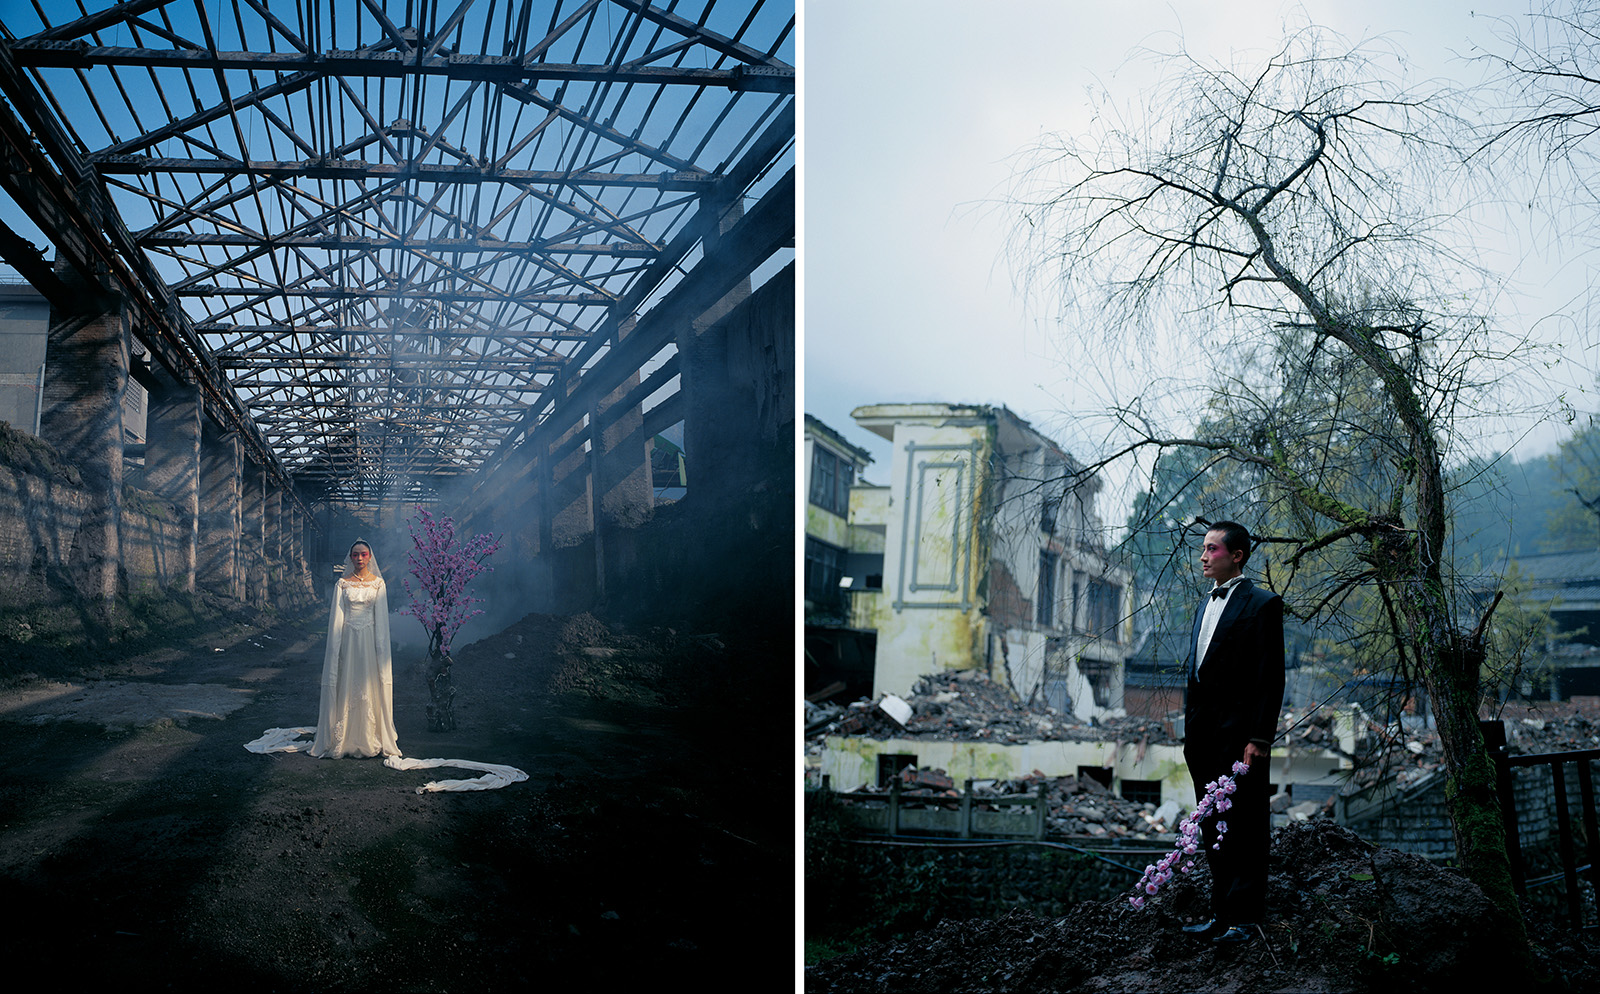 Side by side images of a bride standing inside a dilapidated structure and a groom standing outside under a bare tree